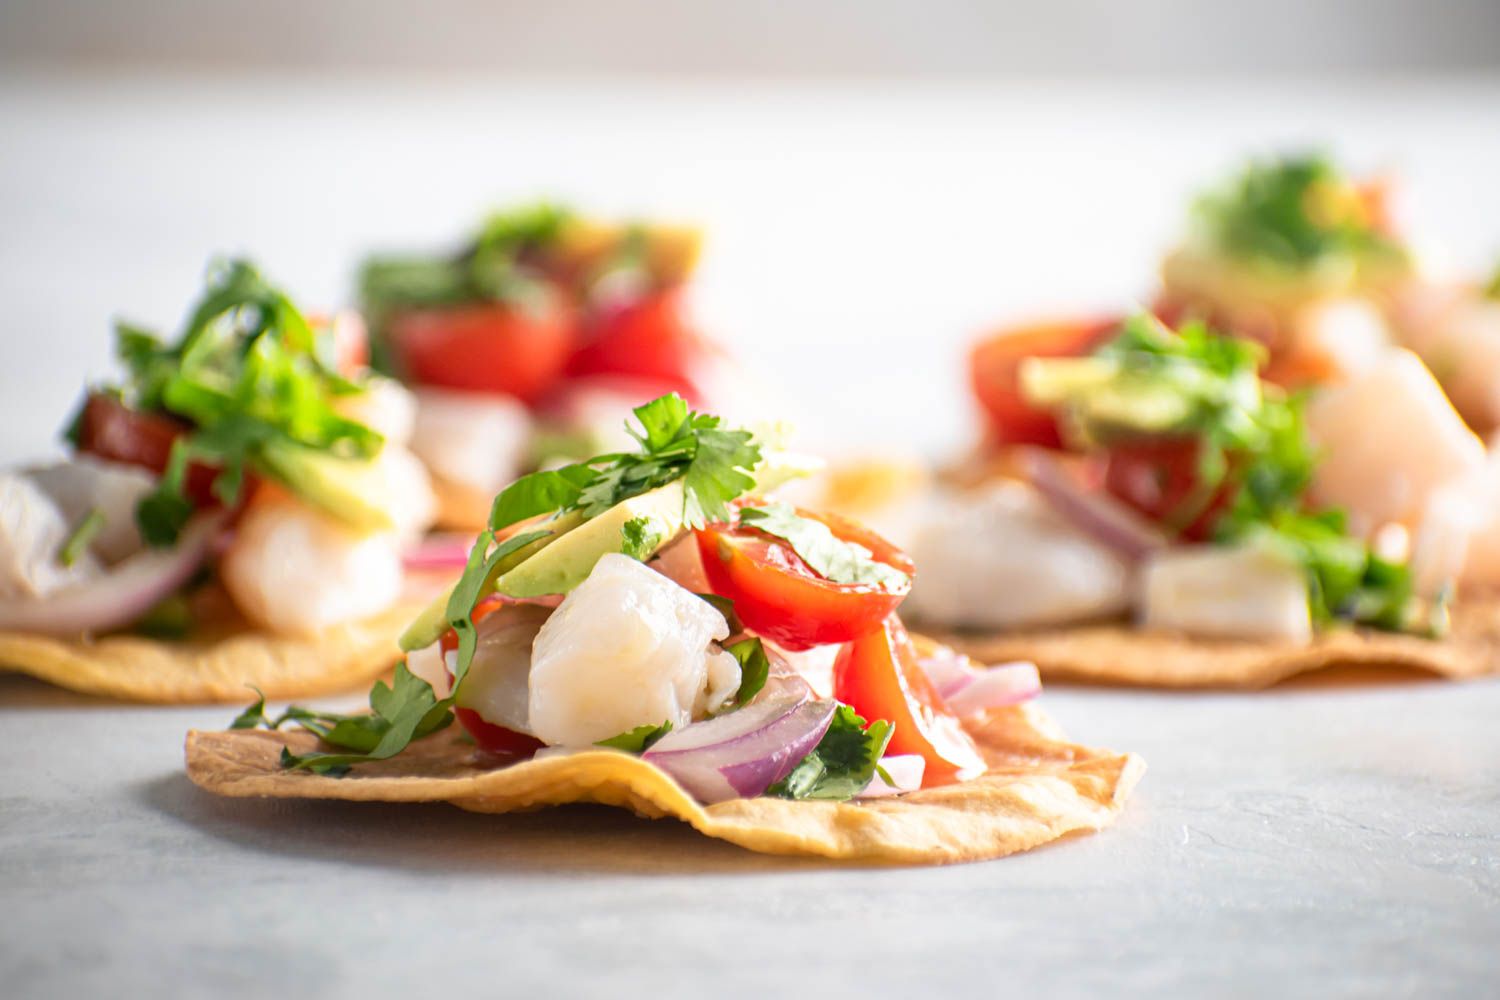 Tostadas de Ceviche with white fish cured in lime juice, tomatoes, red onion, cilantro, and avocado on a baked corn tortilla.